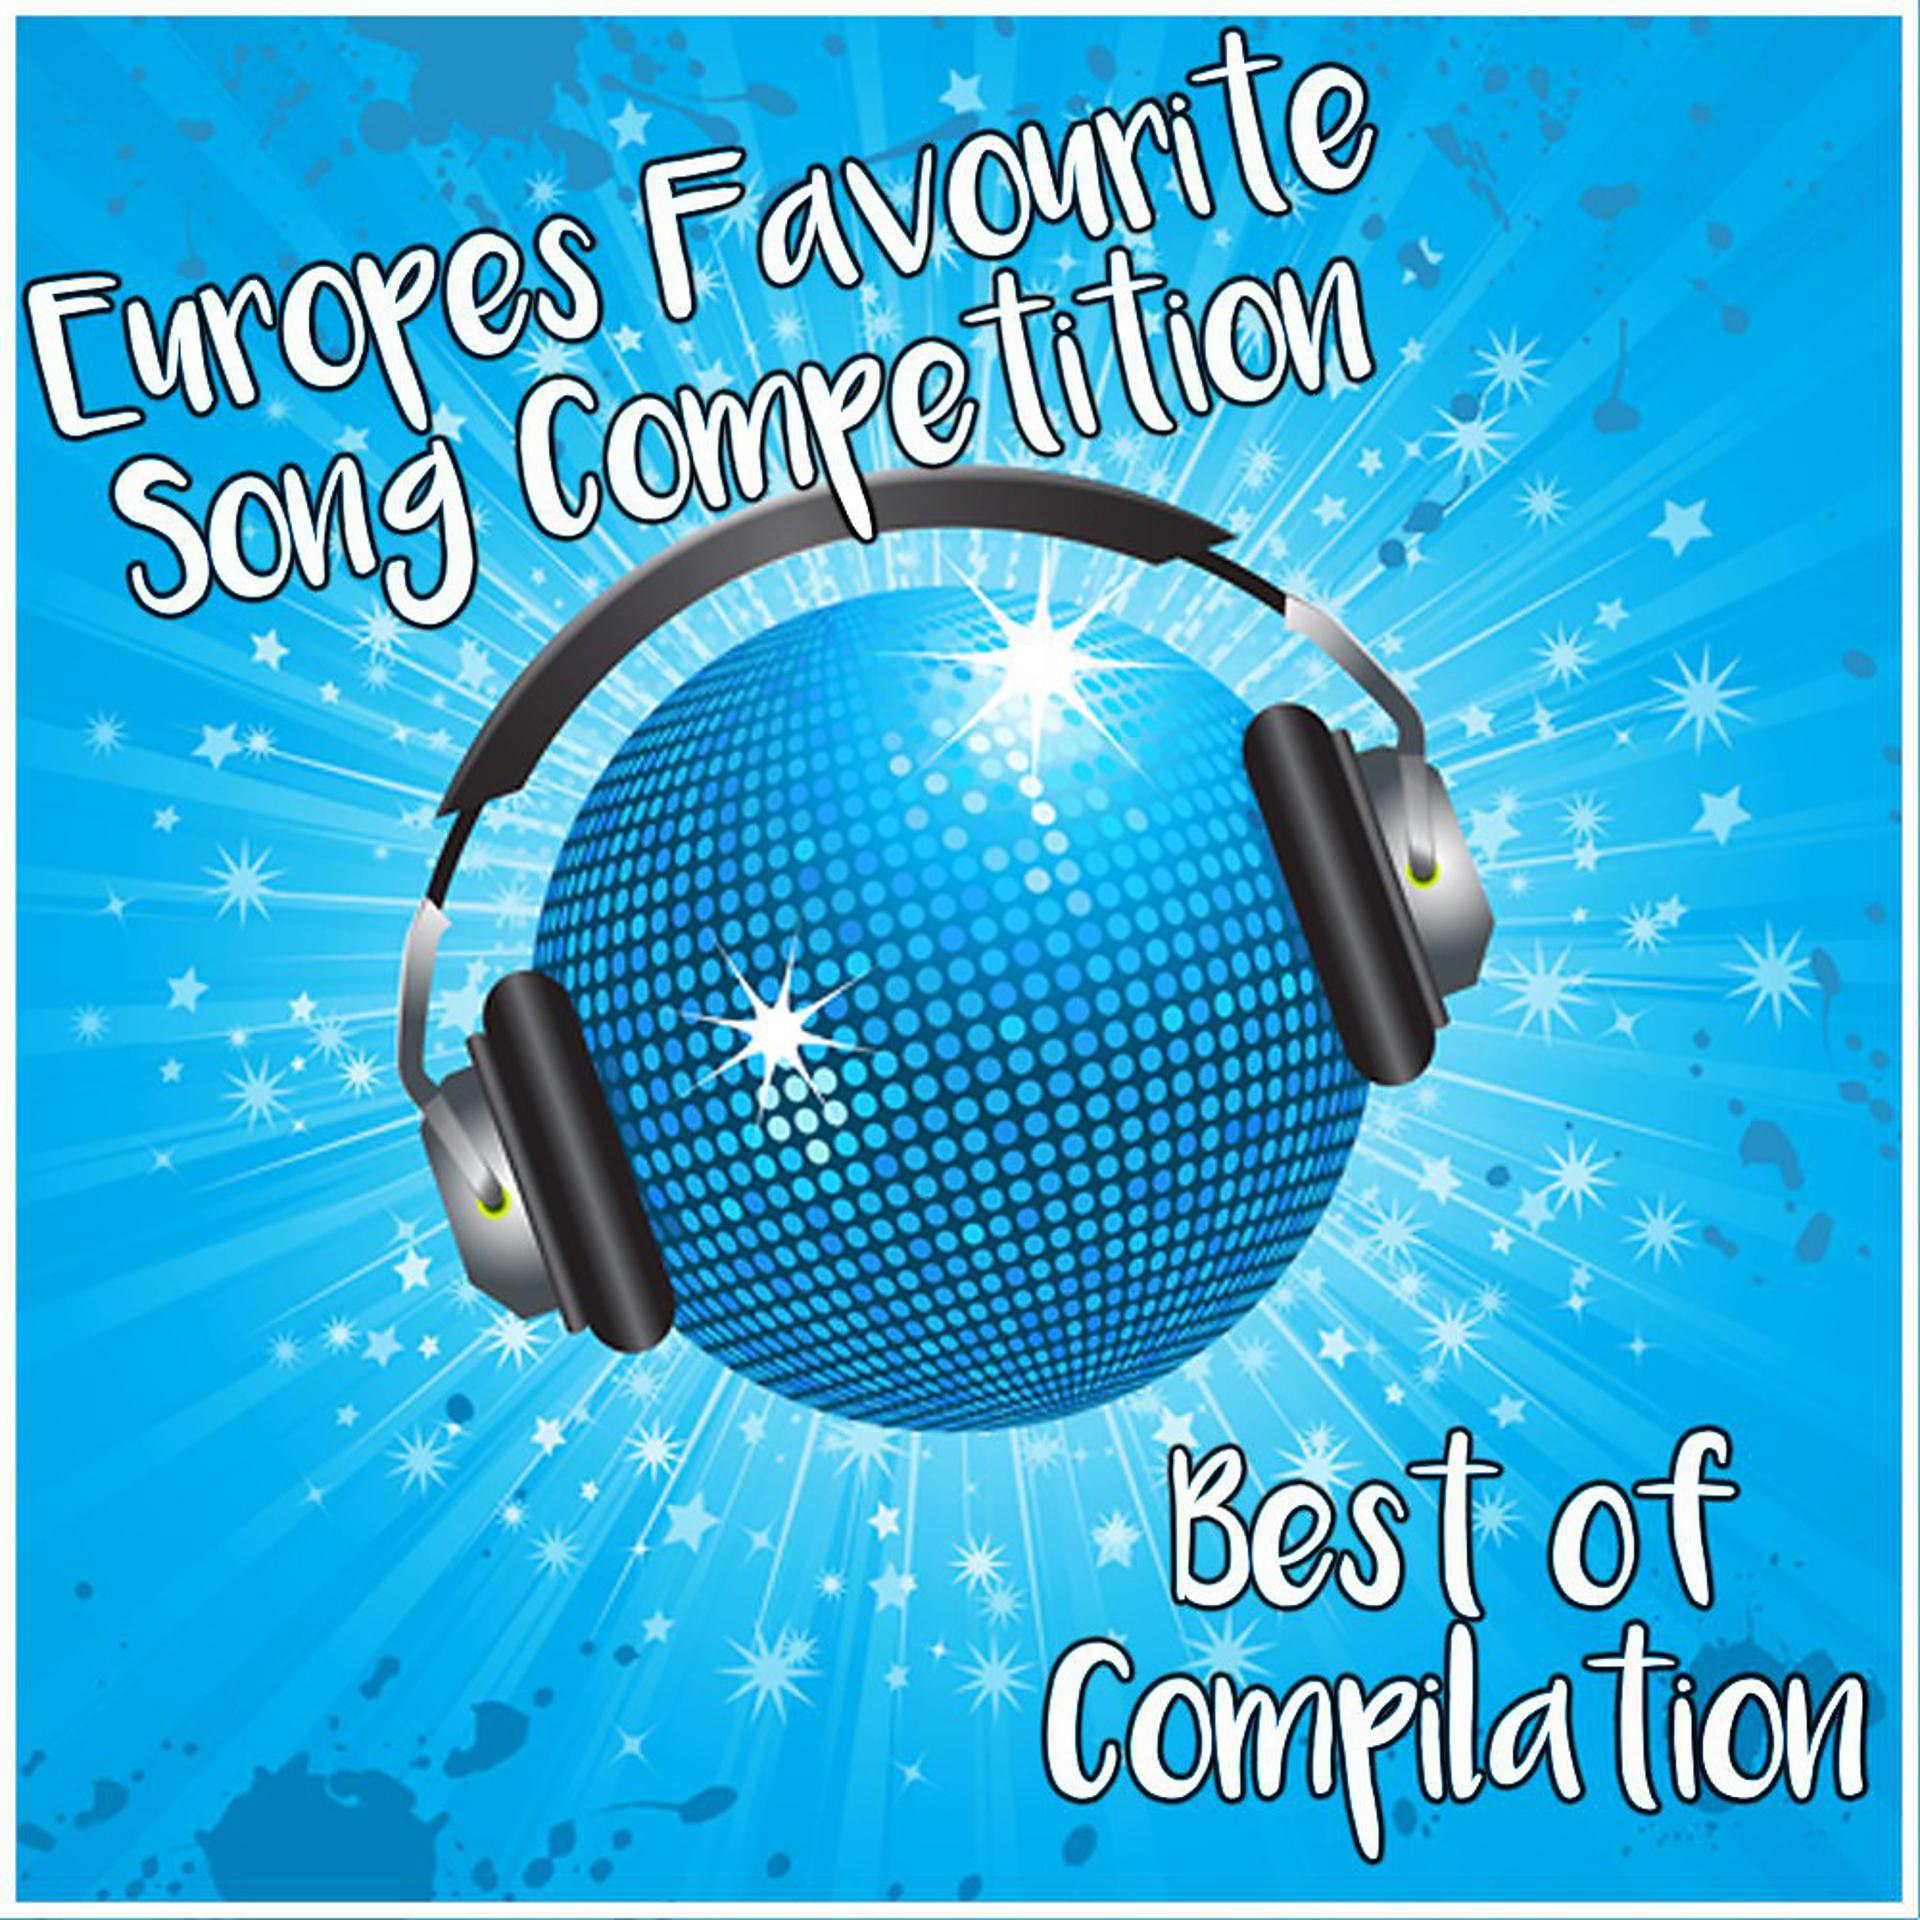 Постер альбома Europes Favourite Song Competition: Best of Competition